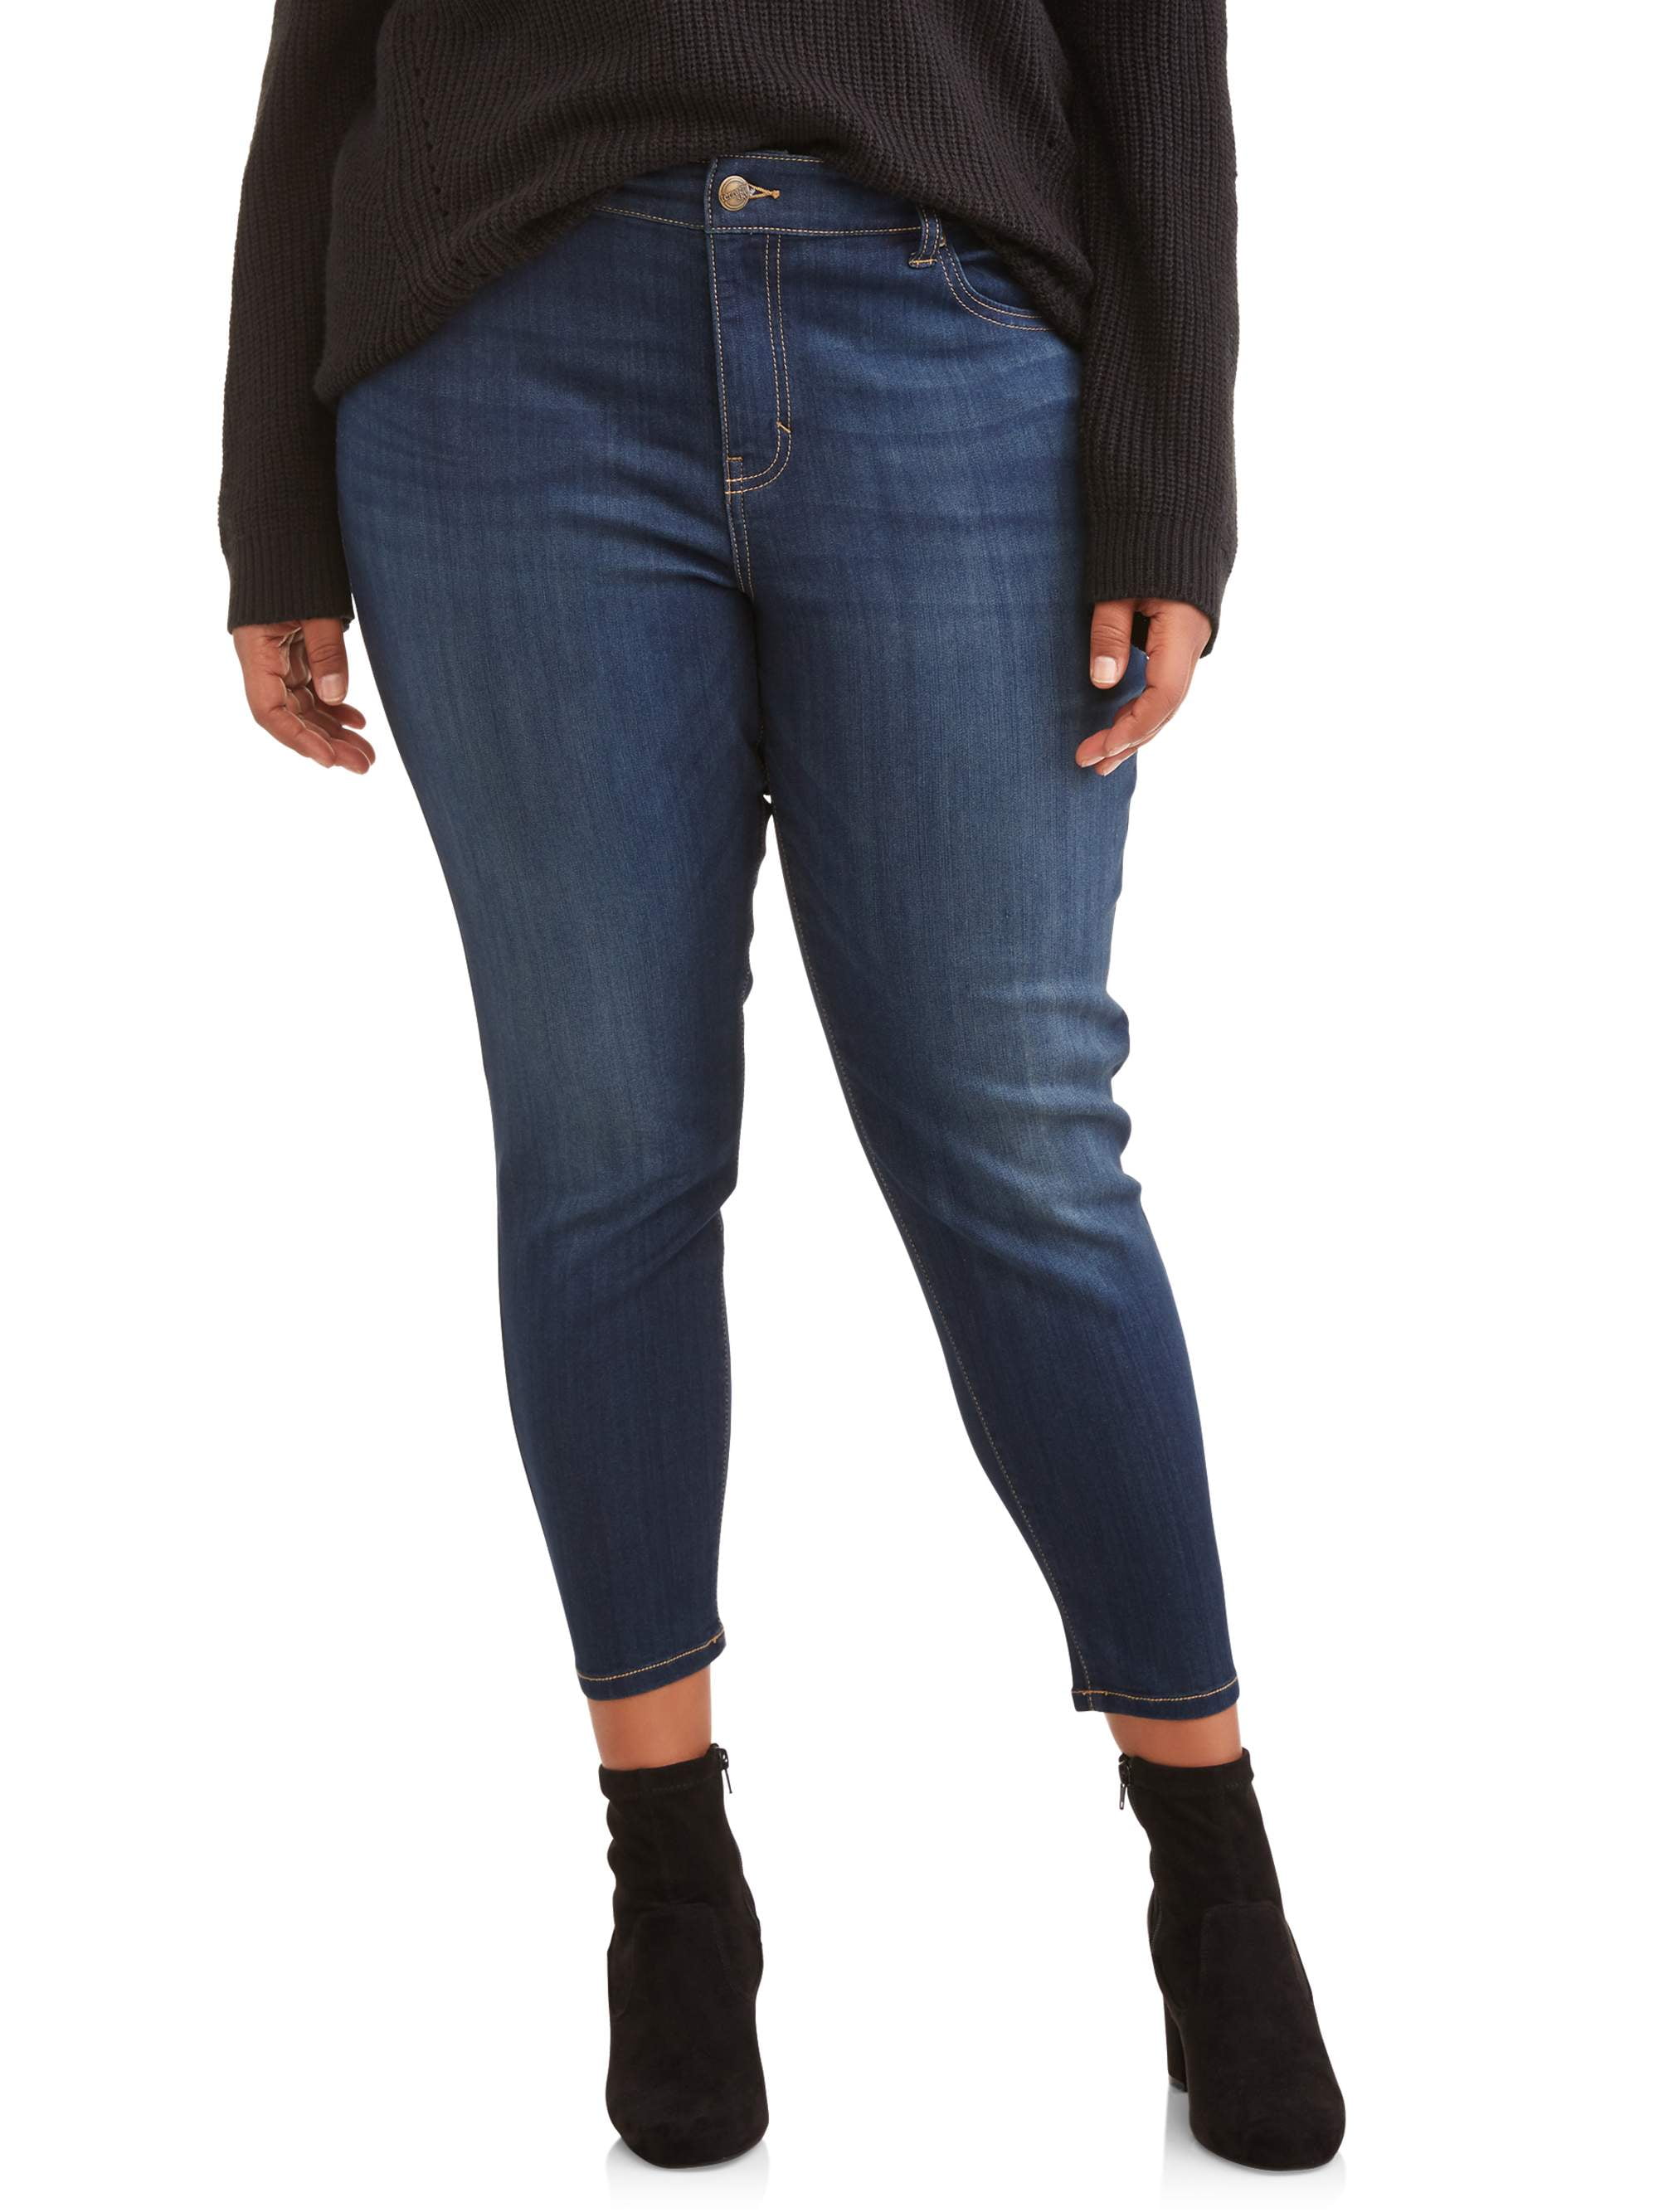 terra and sky skinny ankle jeans